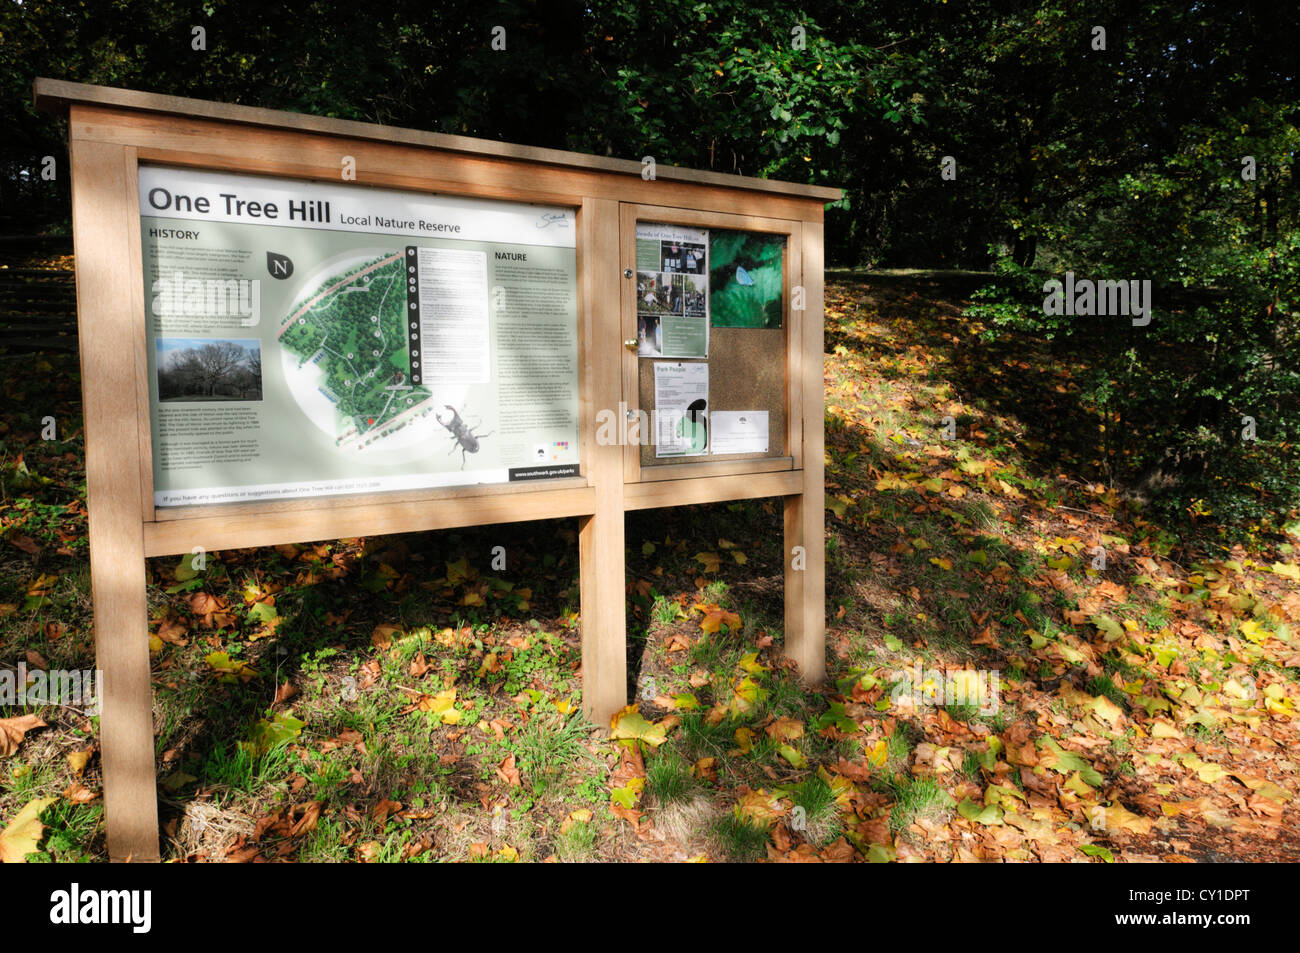 An interpretative sign on One Tree Hill local nature reserve in South London. Stock Photo